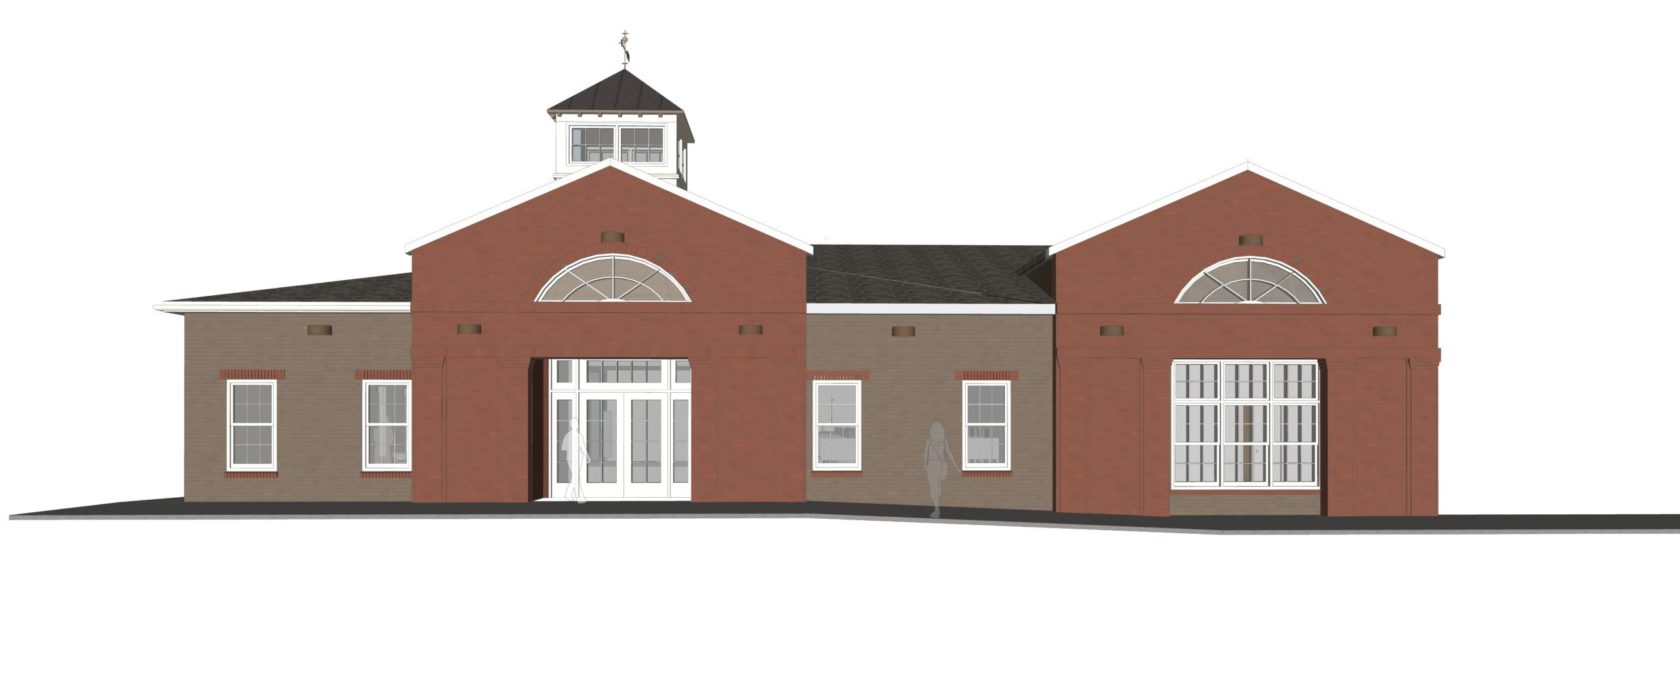 0925-1 Hardy County Public LIbrary Front Elevation with exposed recessed brick